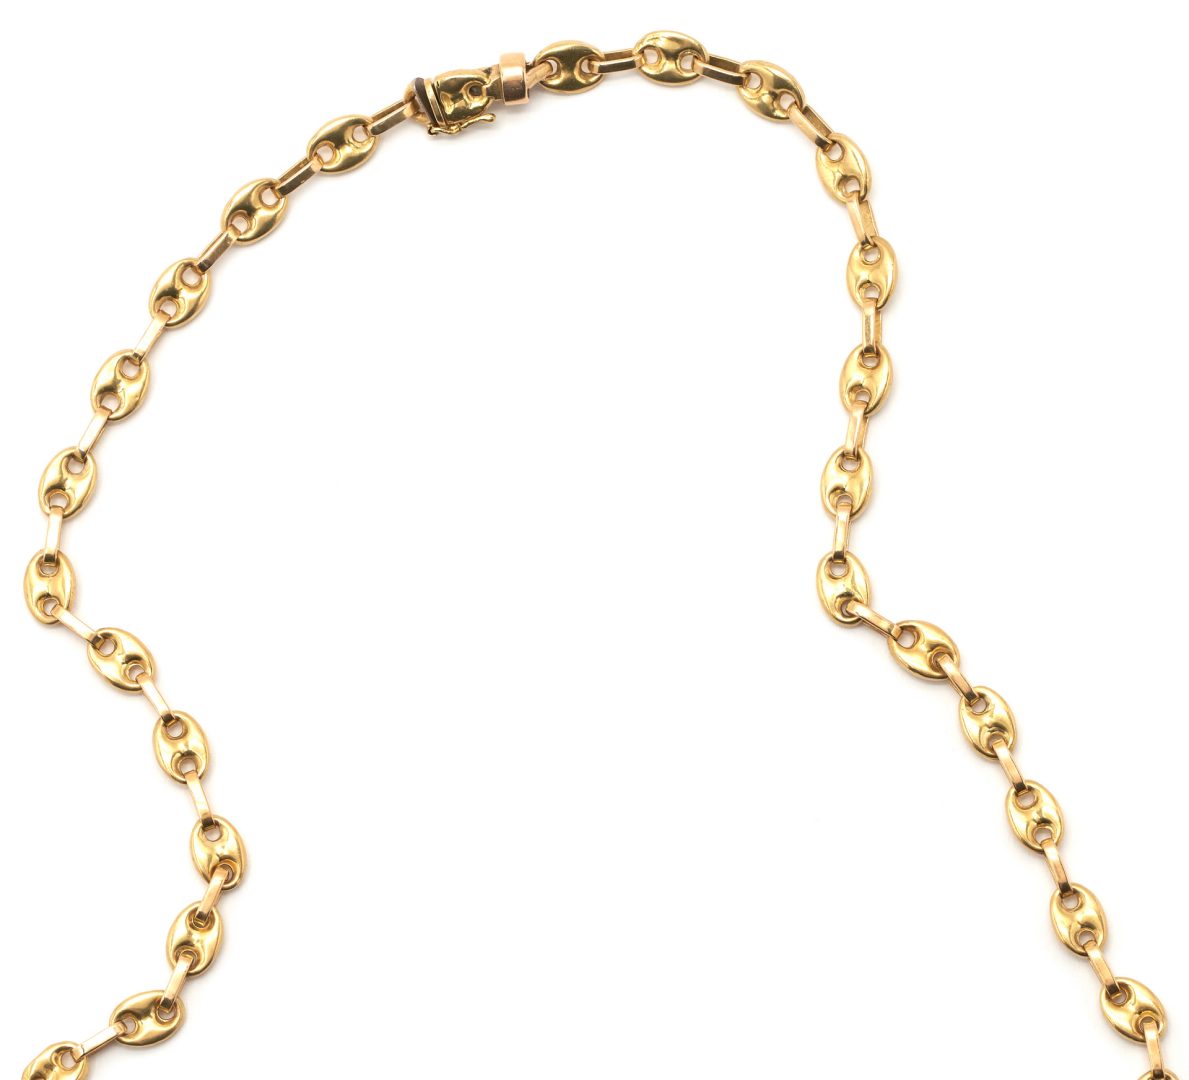 Lot 36: 18K Gold Chain Link Necklace, possibly Chinese